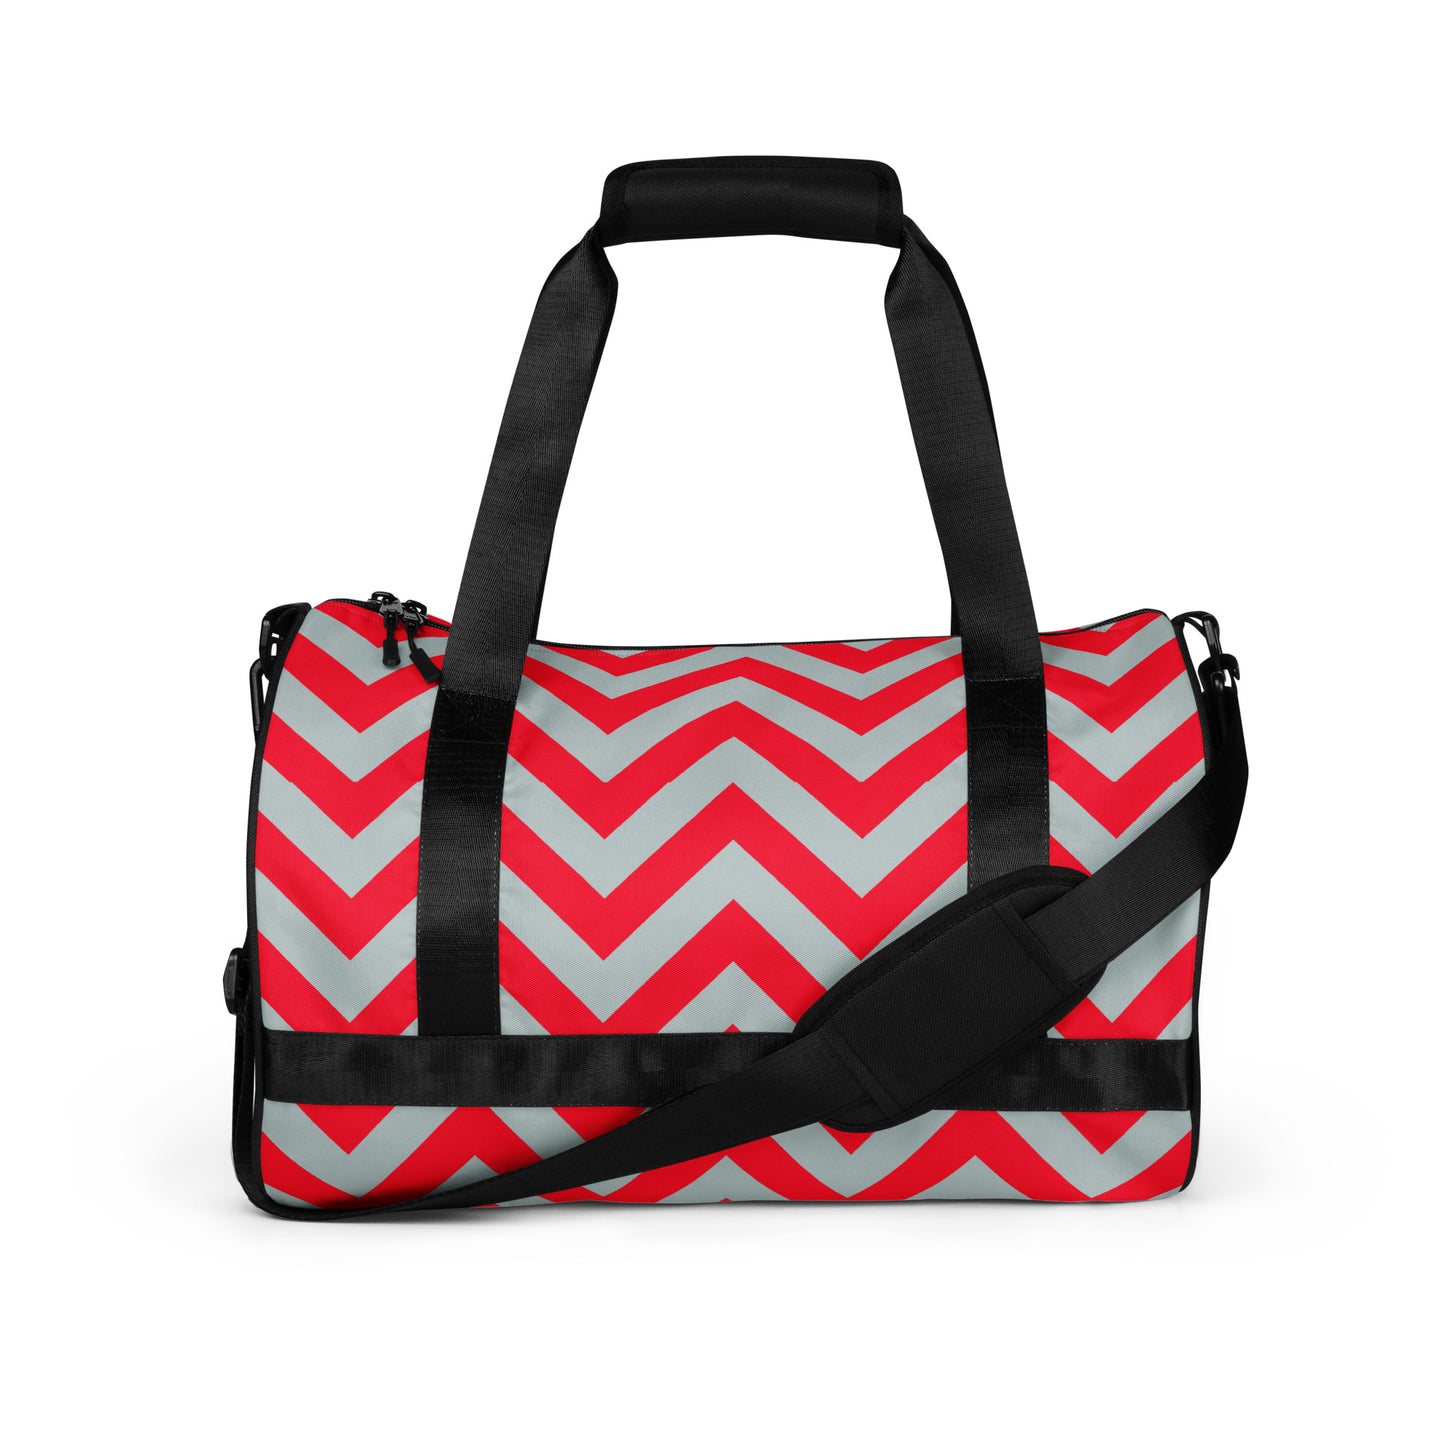 Zigzag - Inspired By Harry Styles - Sustainably Made gym bag